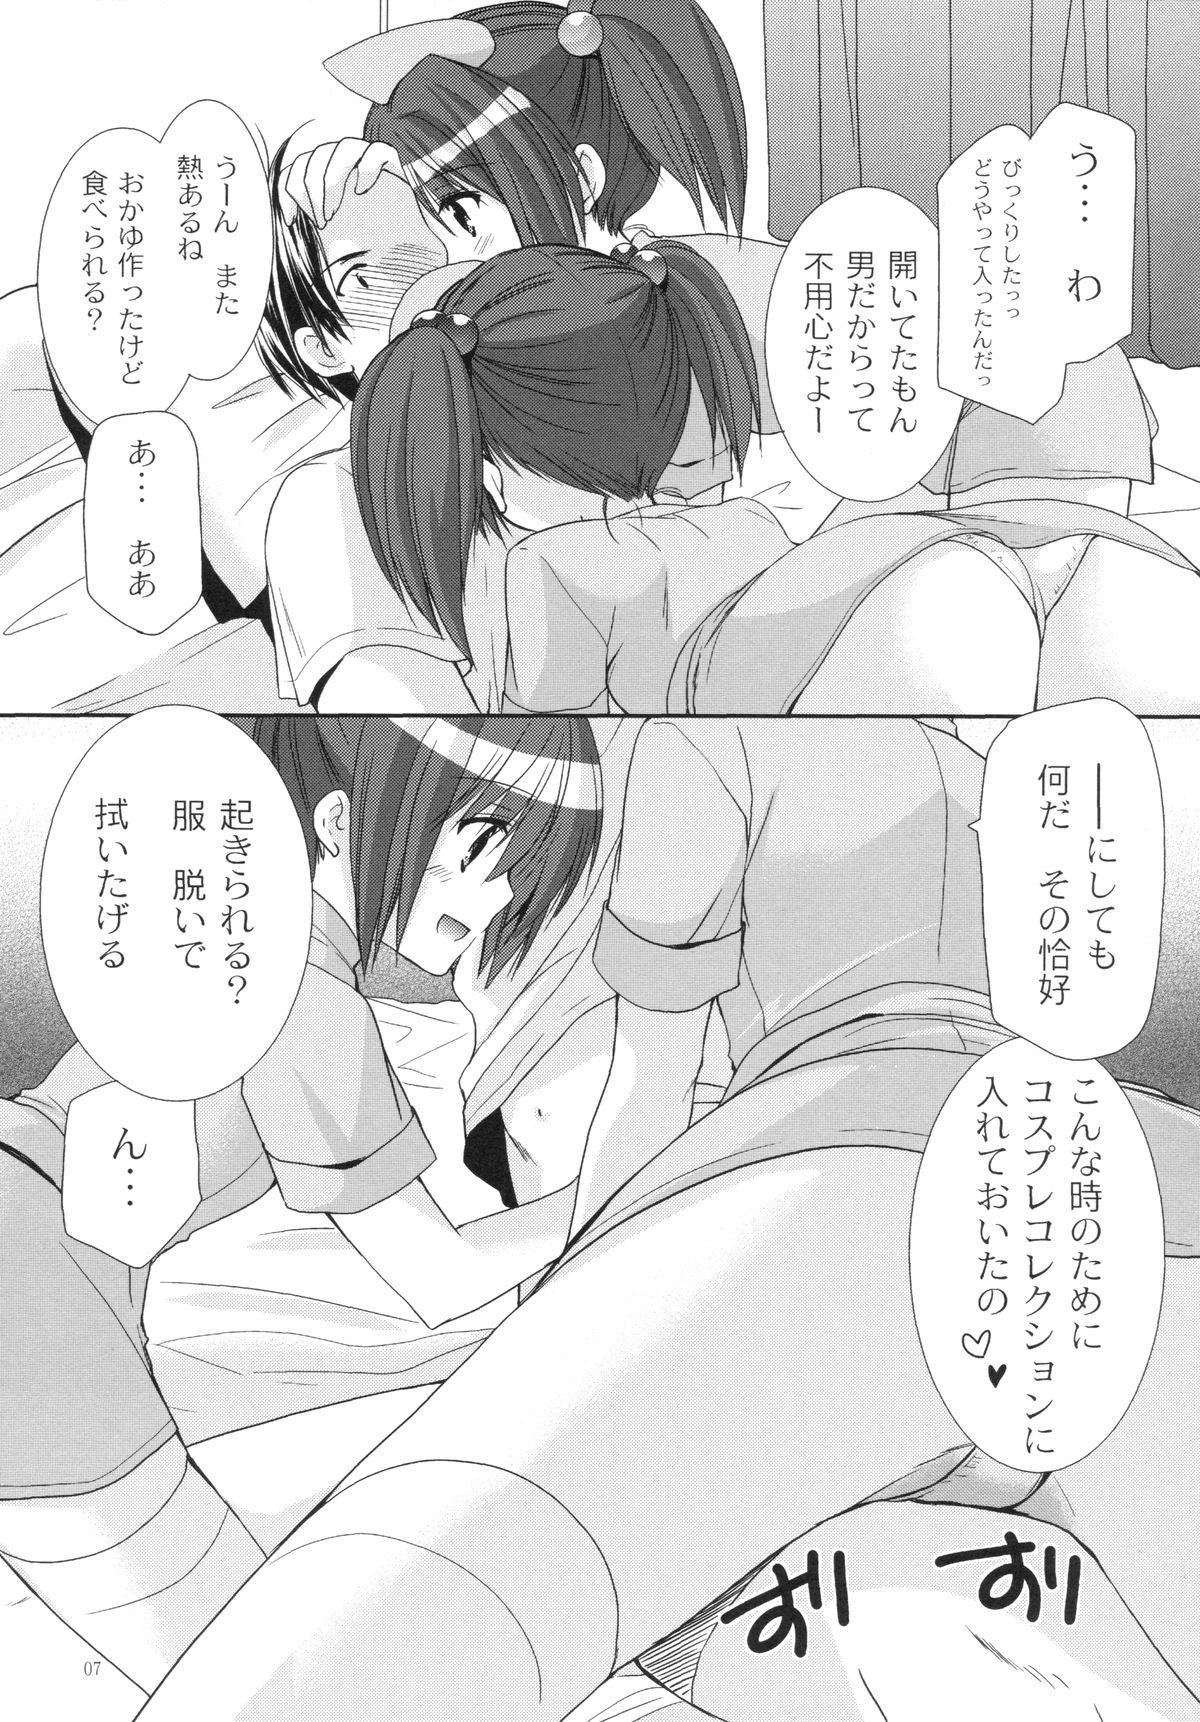 Foreplay Yousei no Tawamure 5 Gay College - Page 6